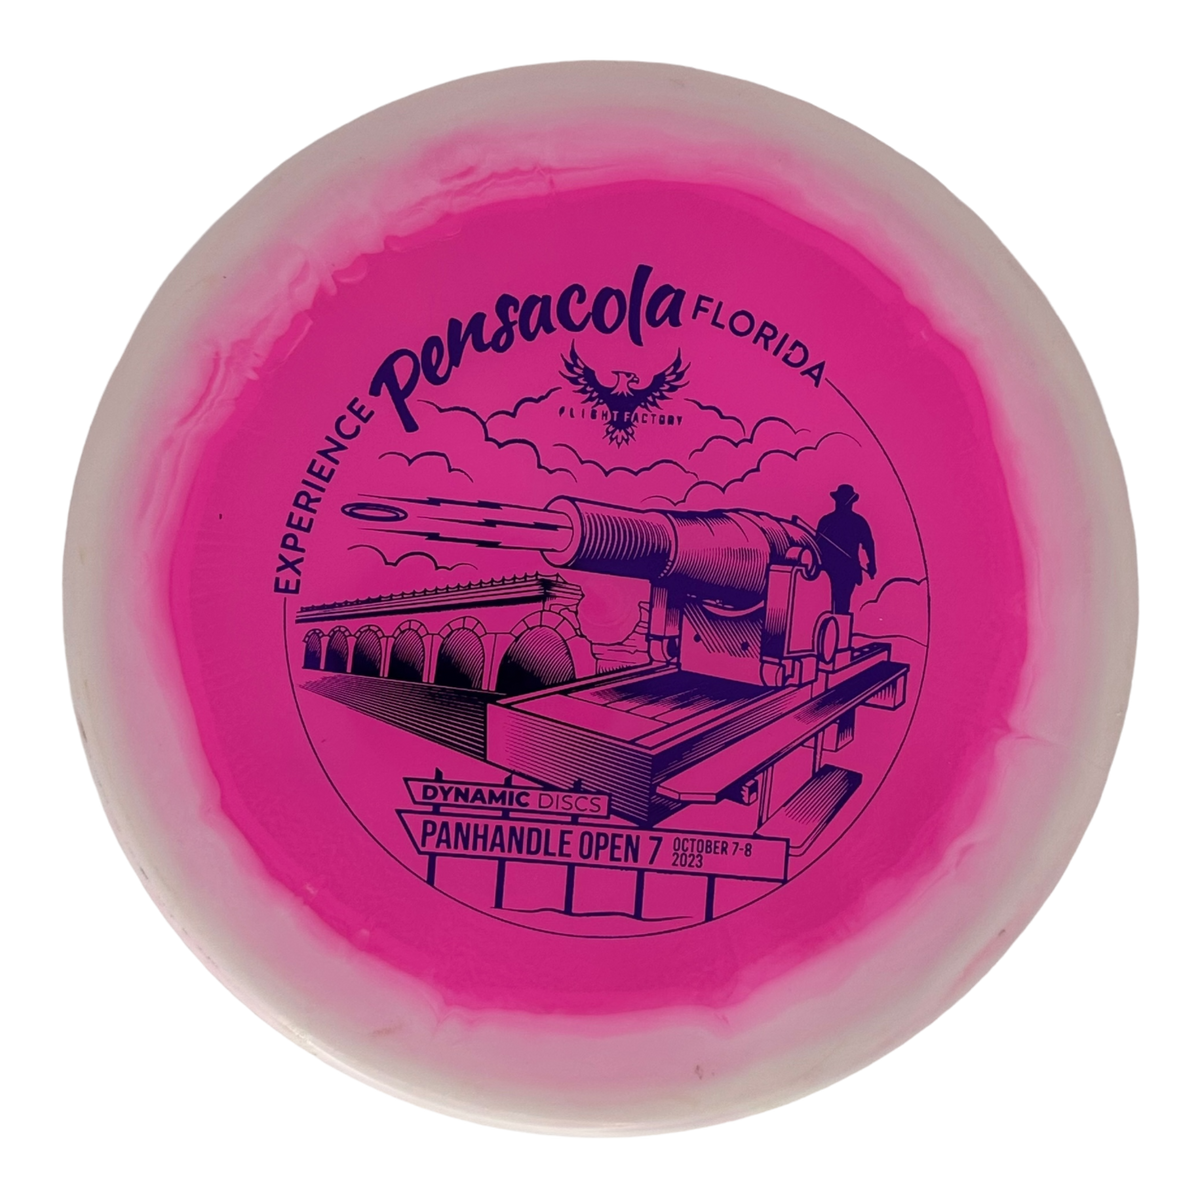 Westside Discs Pre-Owned Approach &amp; Midranges